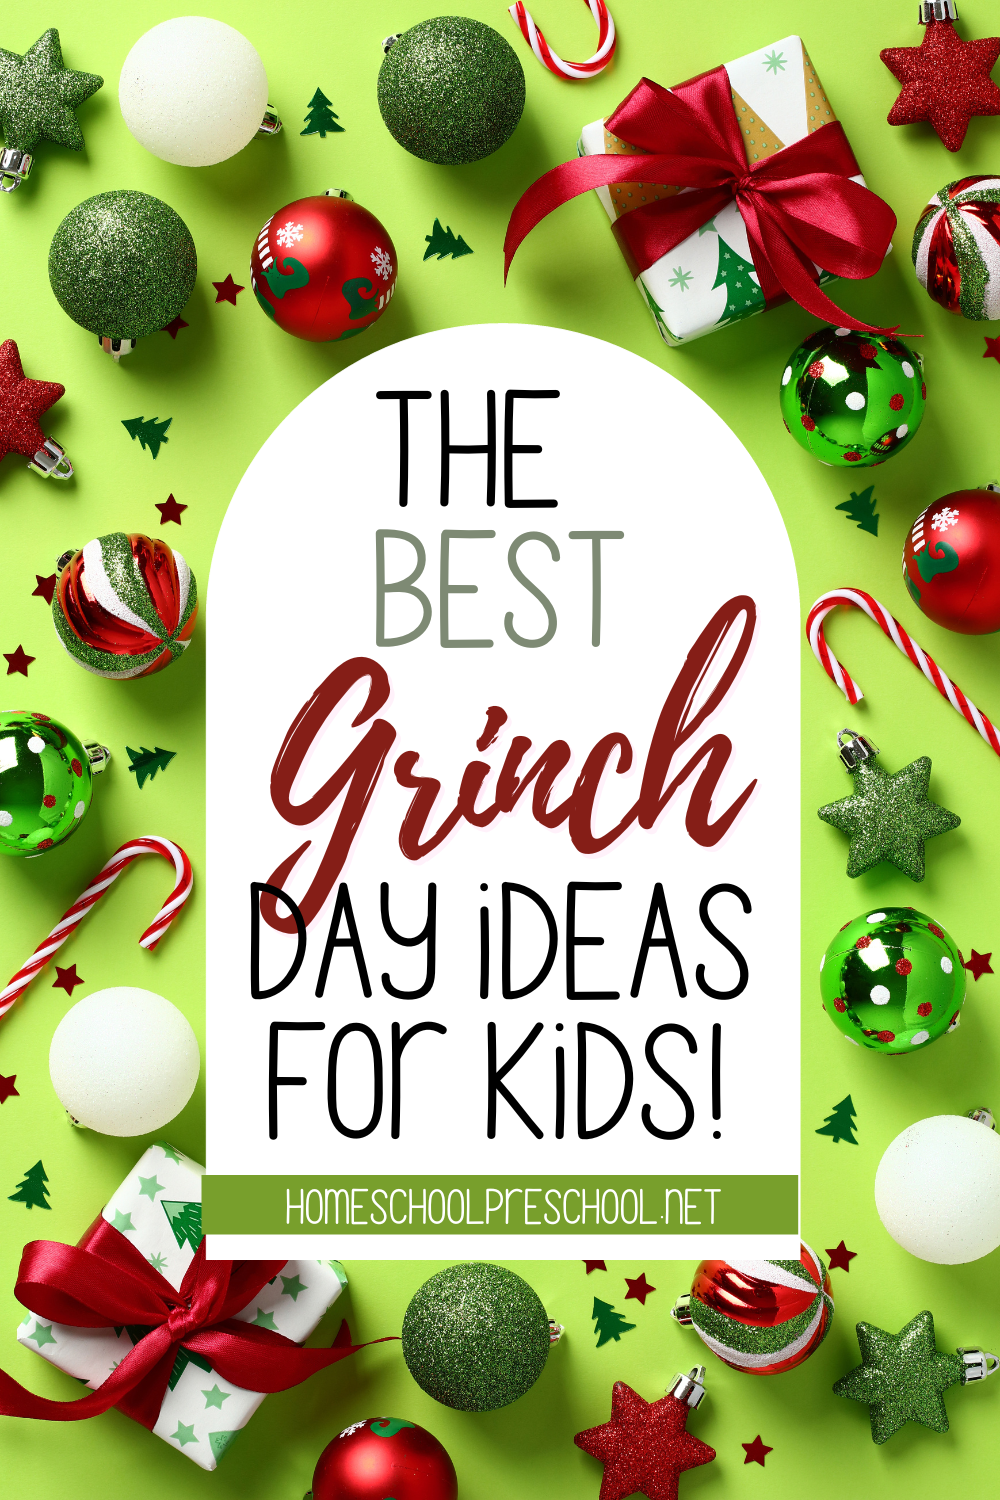 grinch-activities-for-kids Grinch Day Ideas